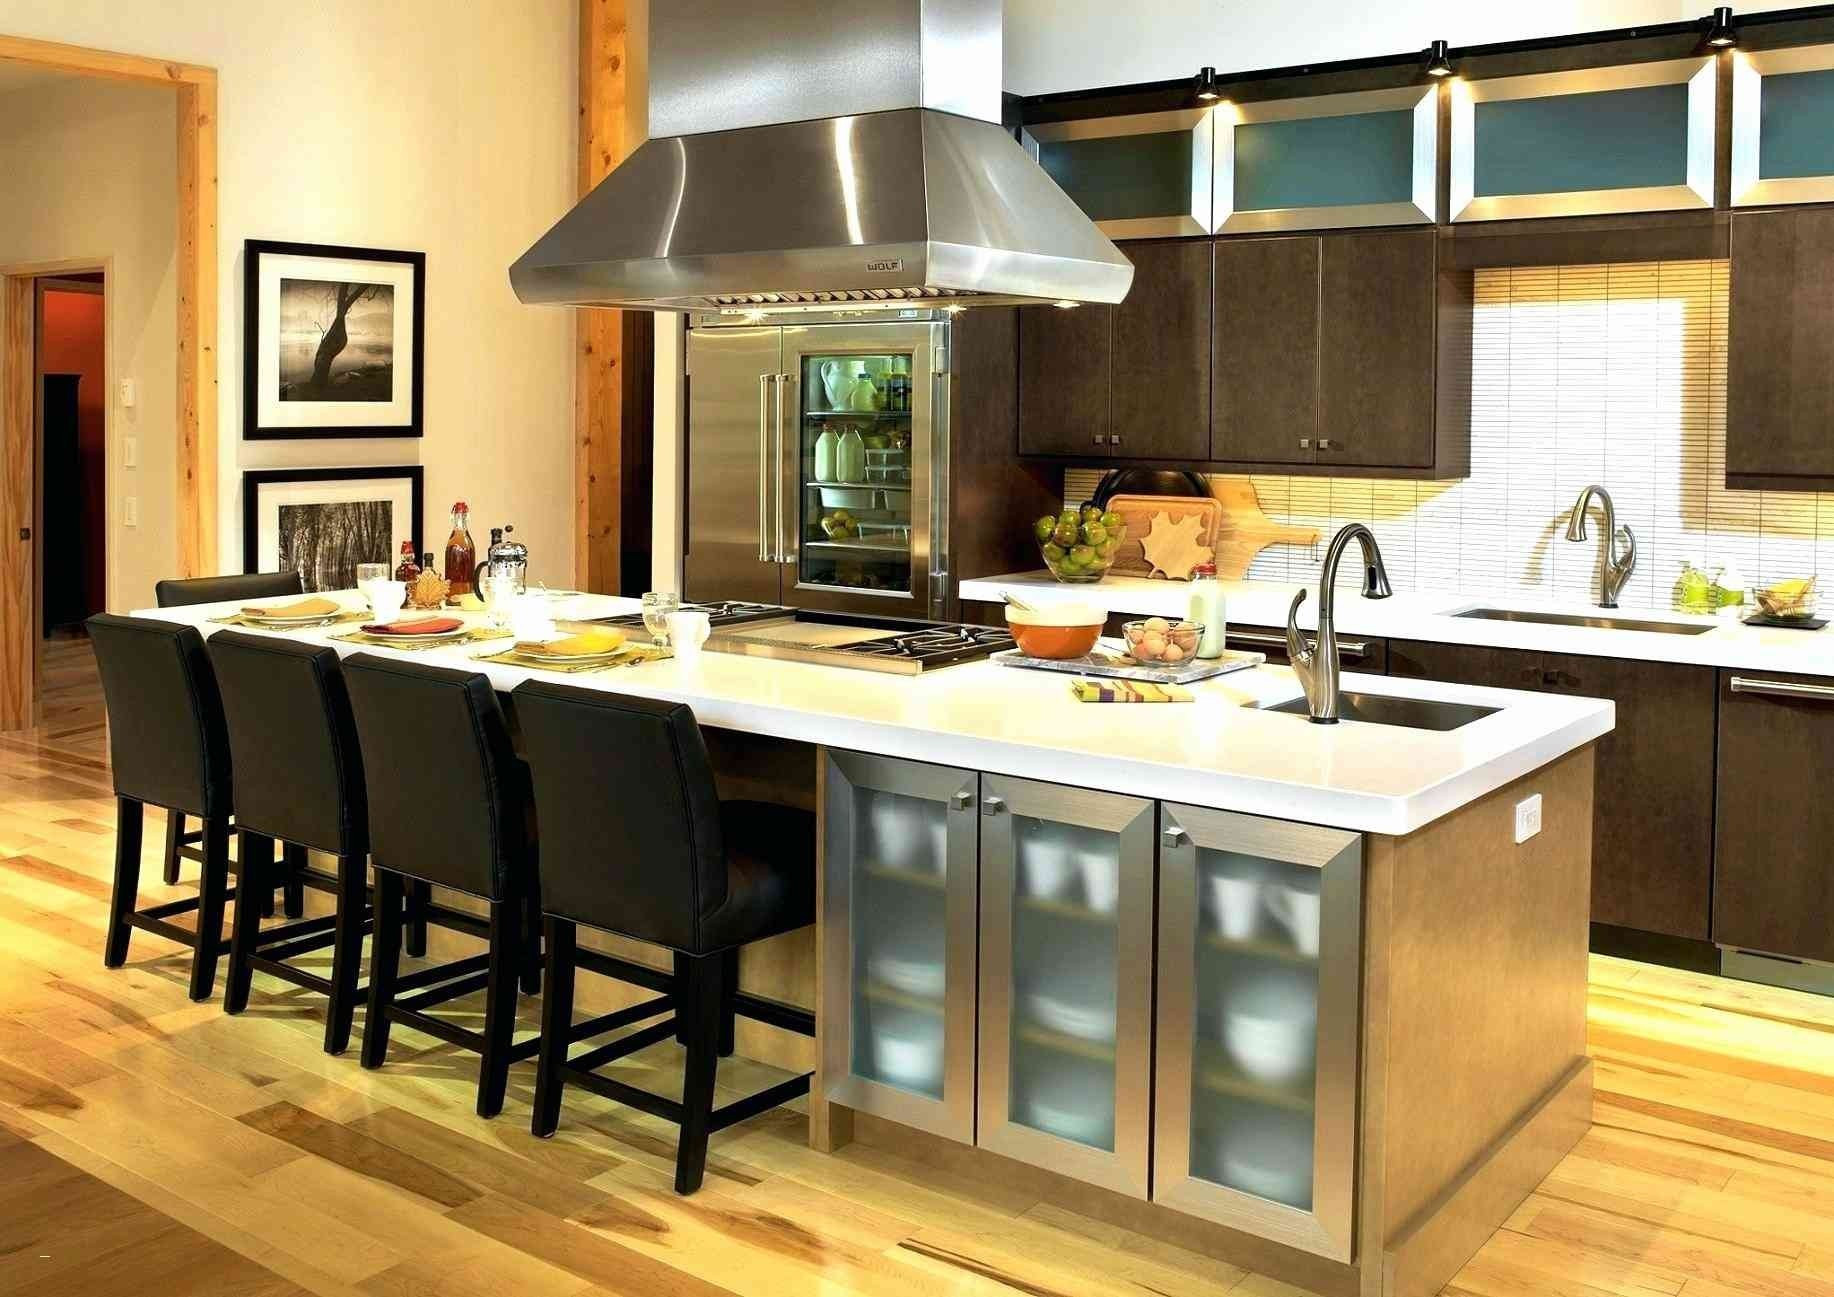 24 Awesome Pictures Of Dark Hardwood Floors In Homes 2024 free download pictures of dark hardwood floors in homes of white kitchen with wood island best of kitchen decor ideas kitchen intended for white kitchen with wood island best of black and white kitchen ca